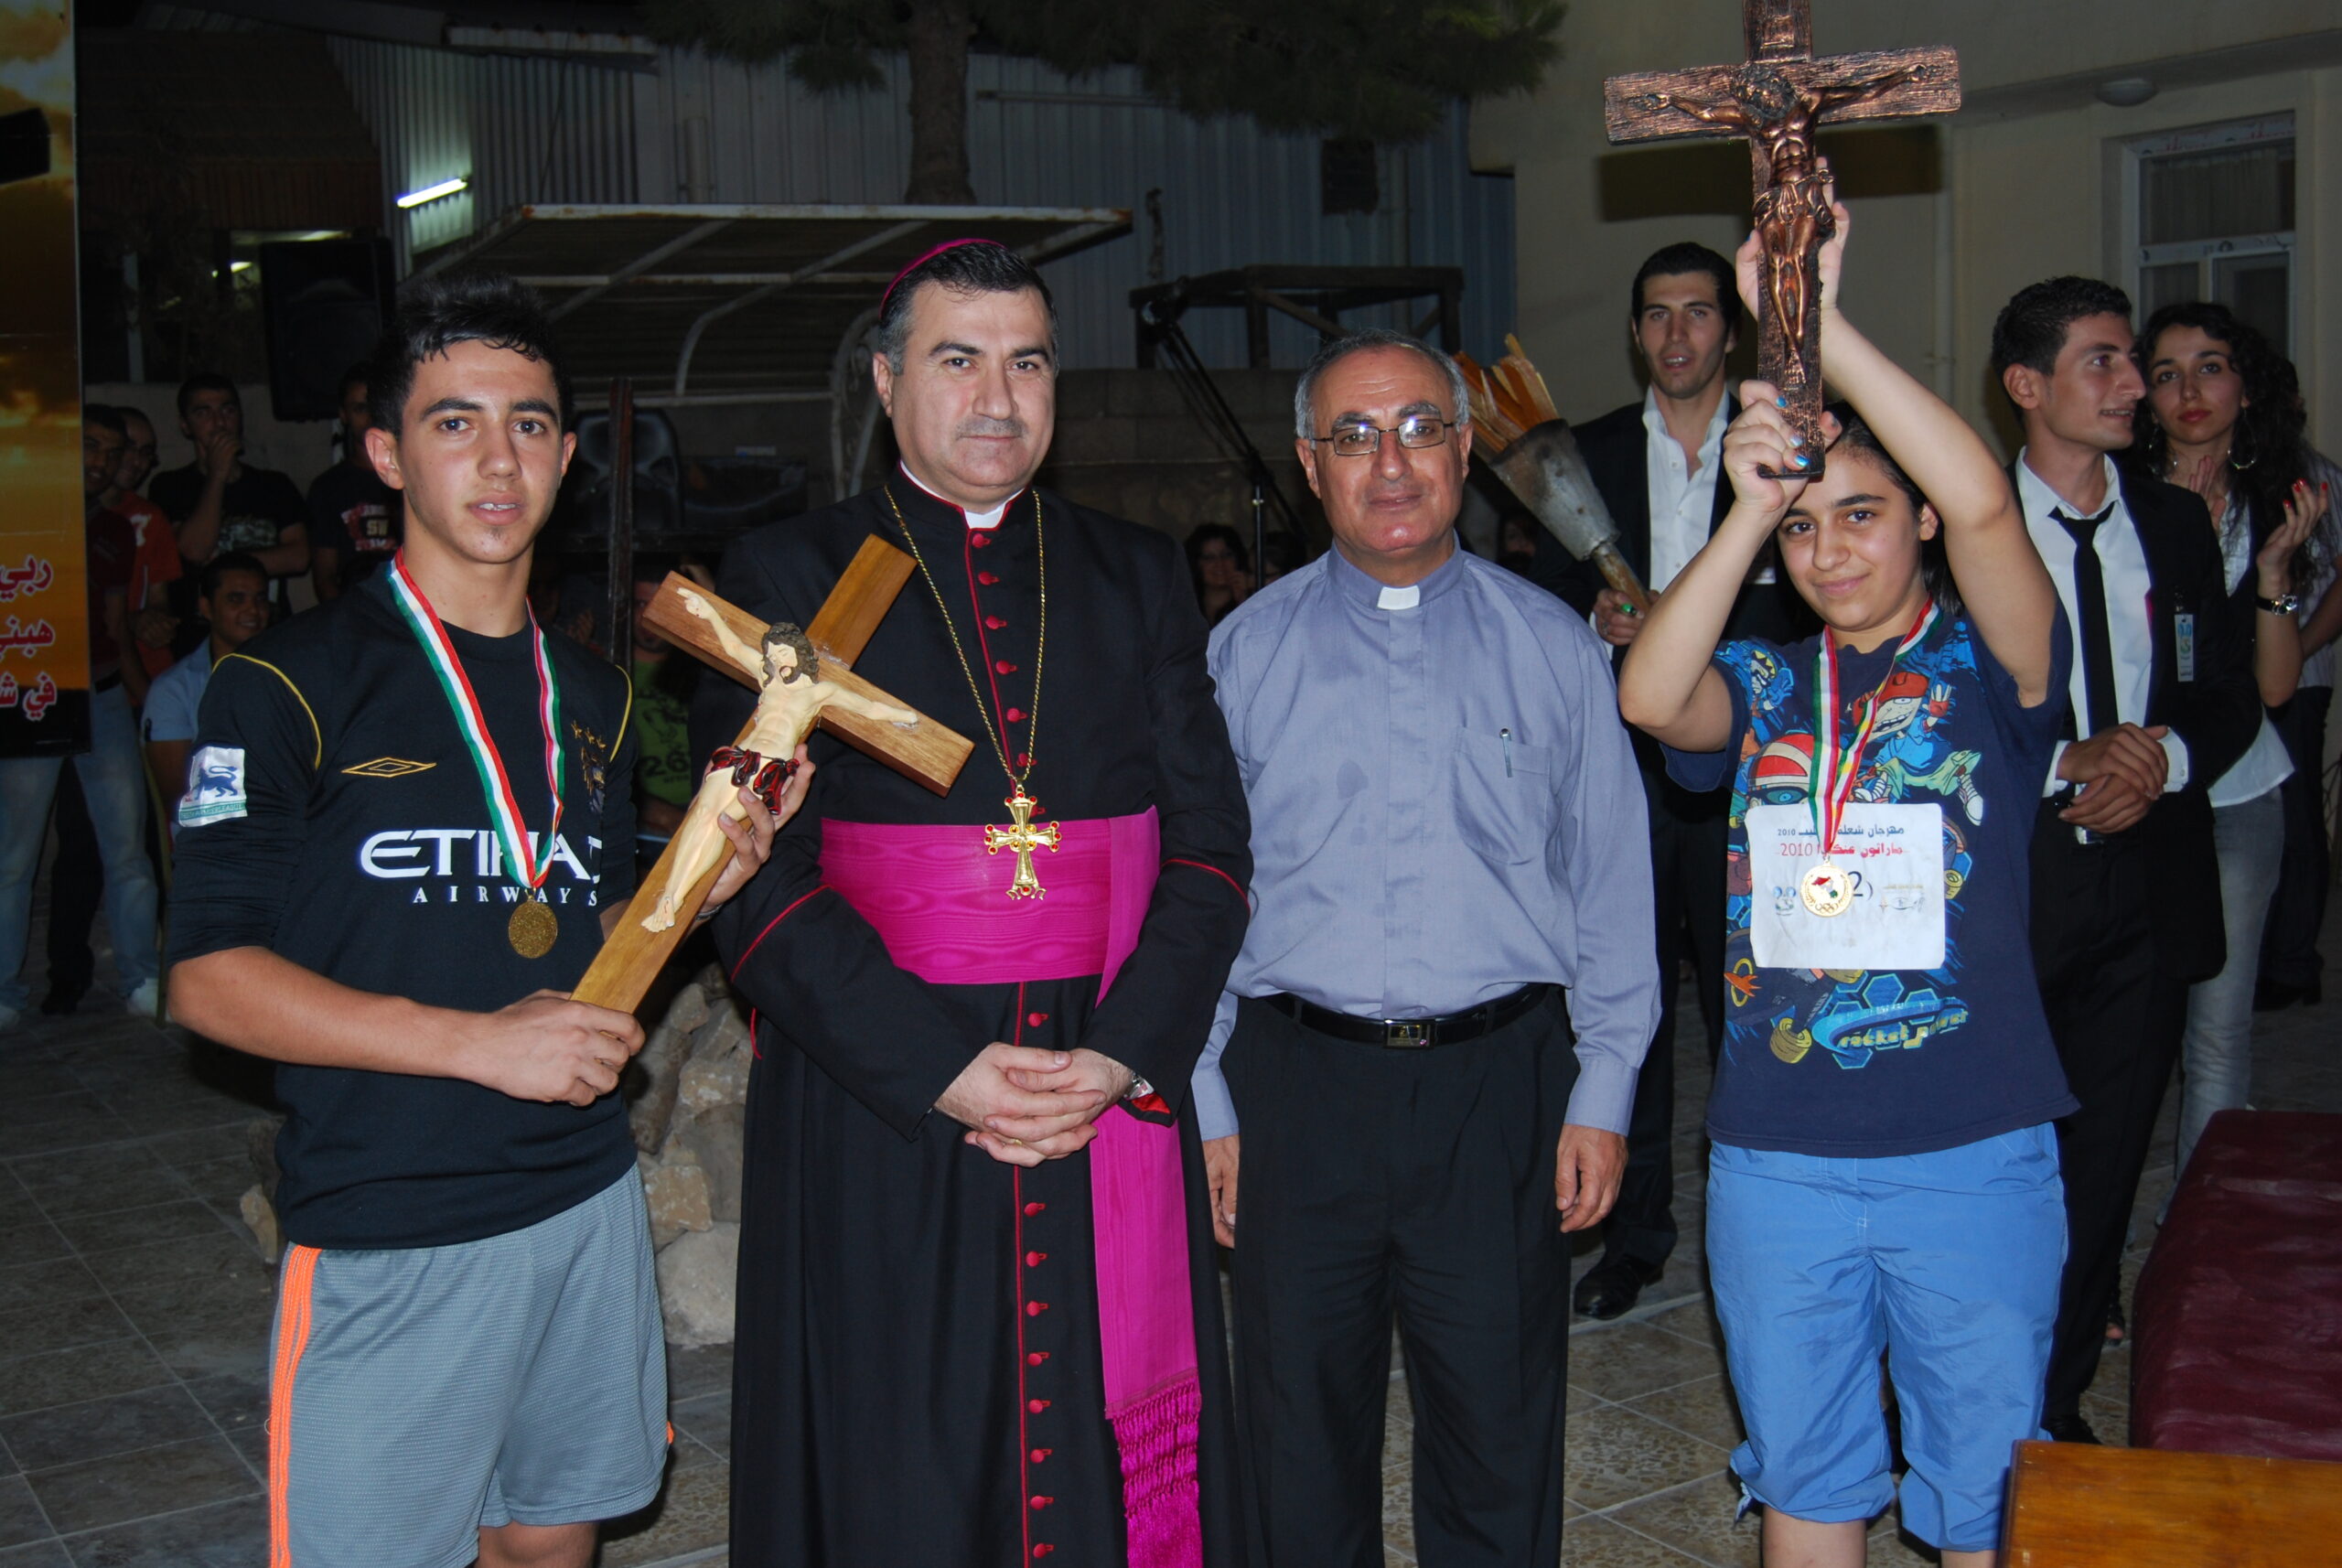 The Flame of the Cross Festival for the Christian Youth Brotherhood